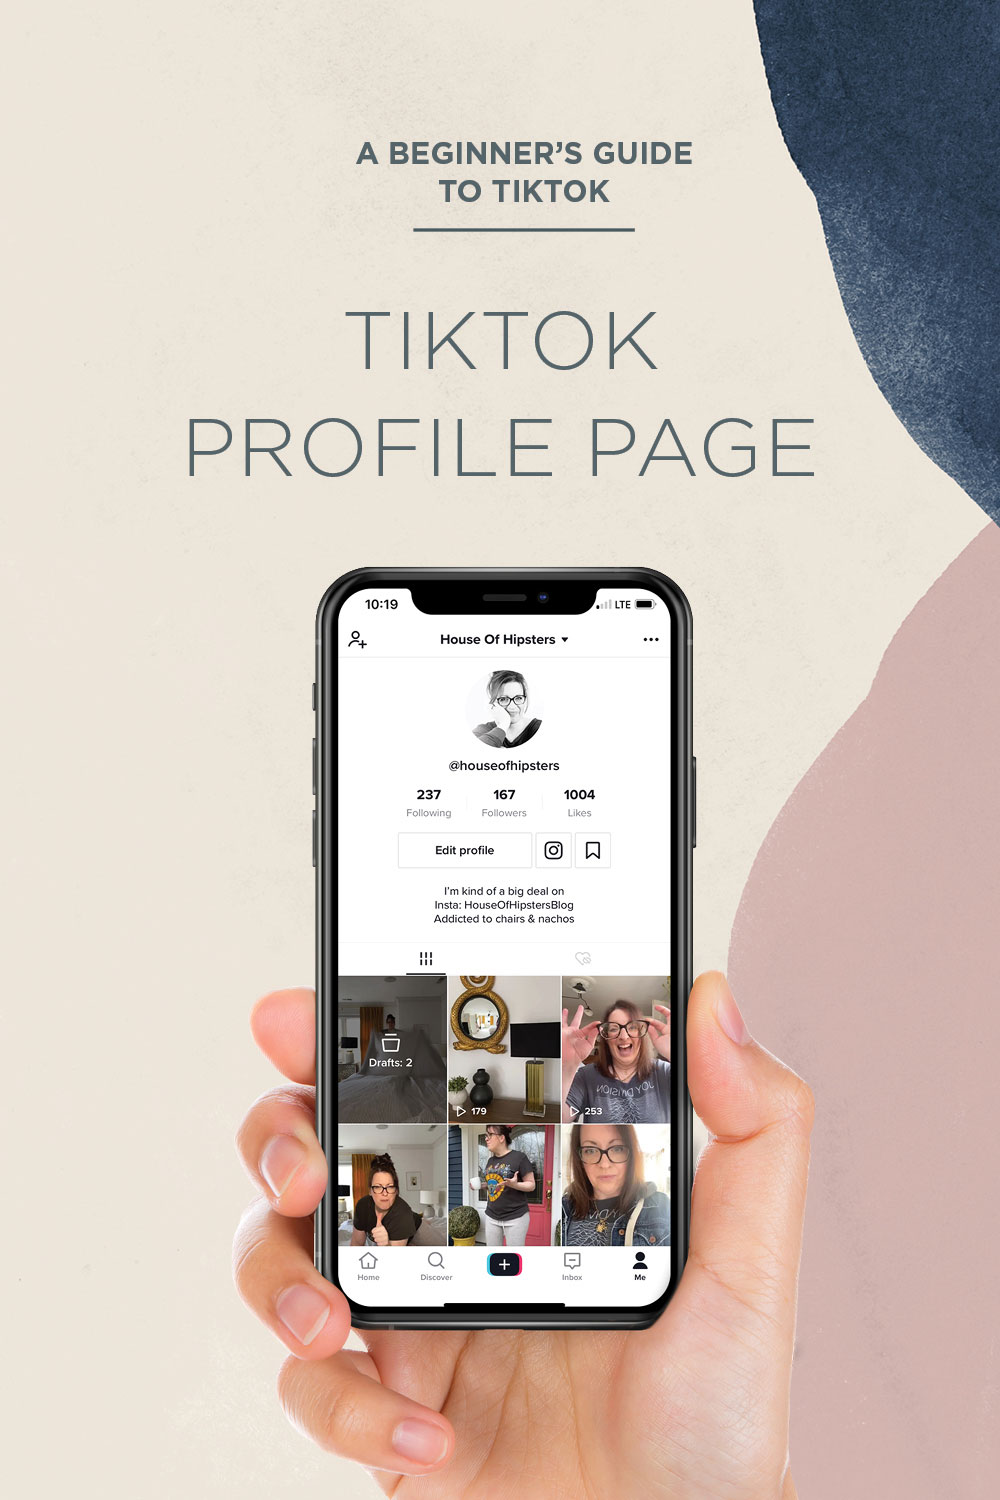 An Easy How To TikTok Tutorial - A beginner's guide to getting started on TikTok for your business and brand